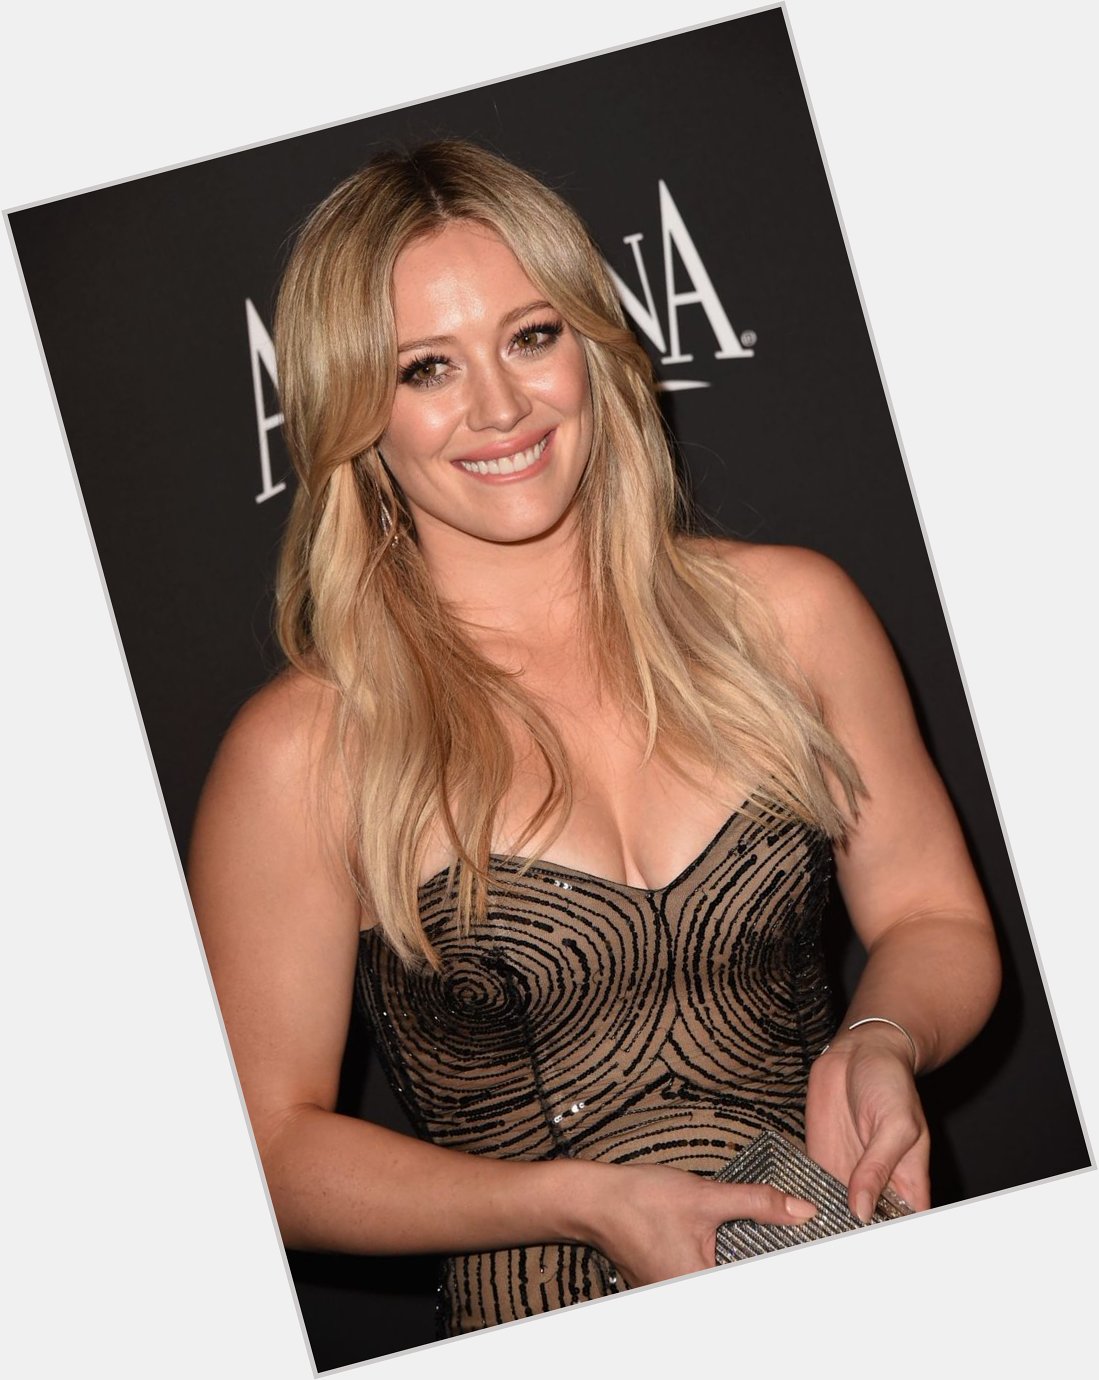 Happy 32nd birthday to the gorgeous, curvy babe Hilary Duff! 